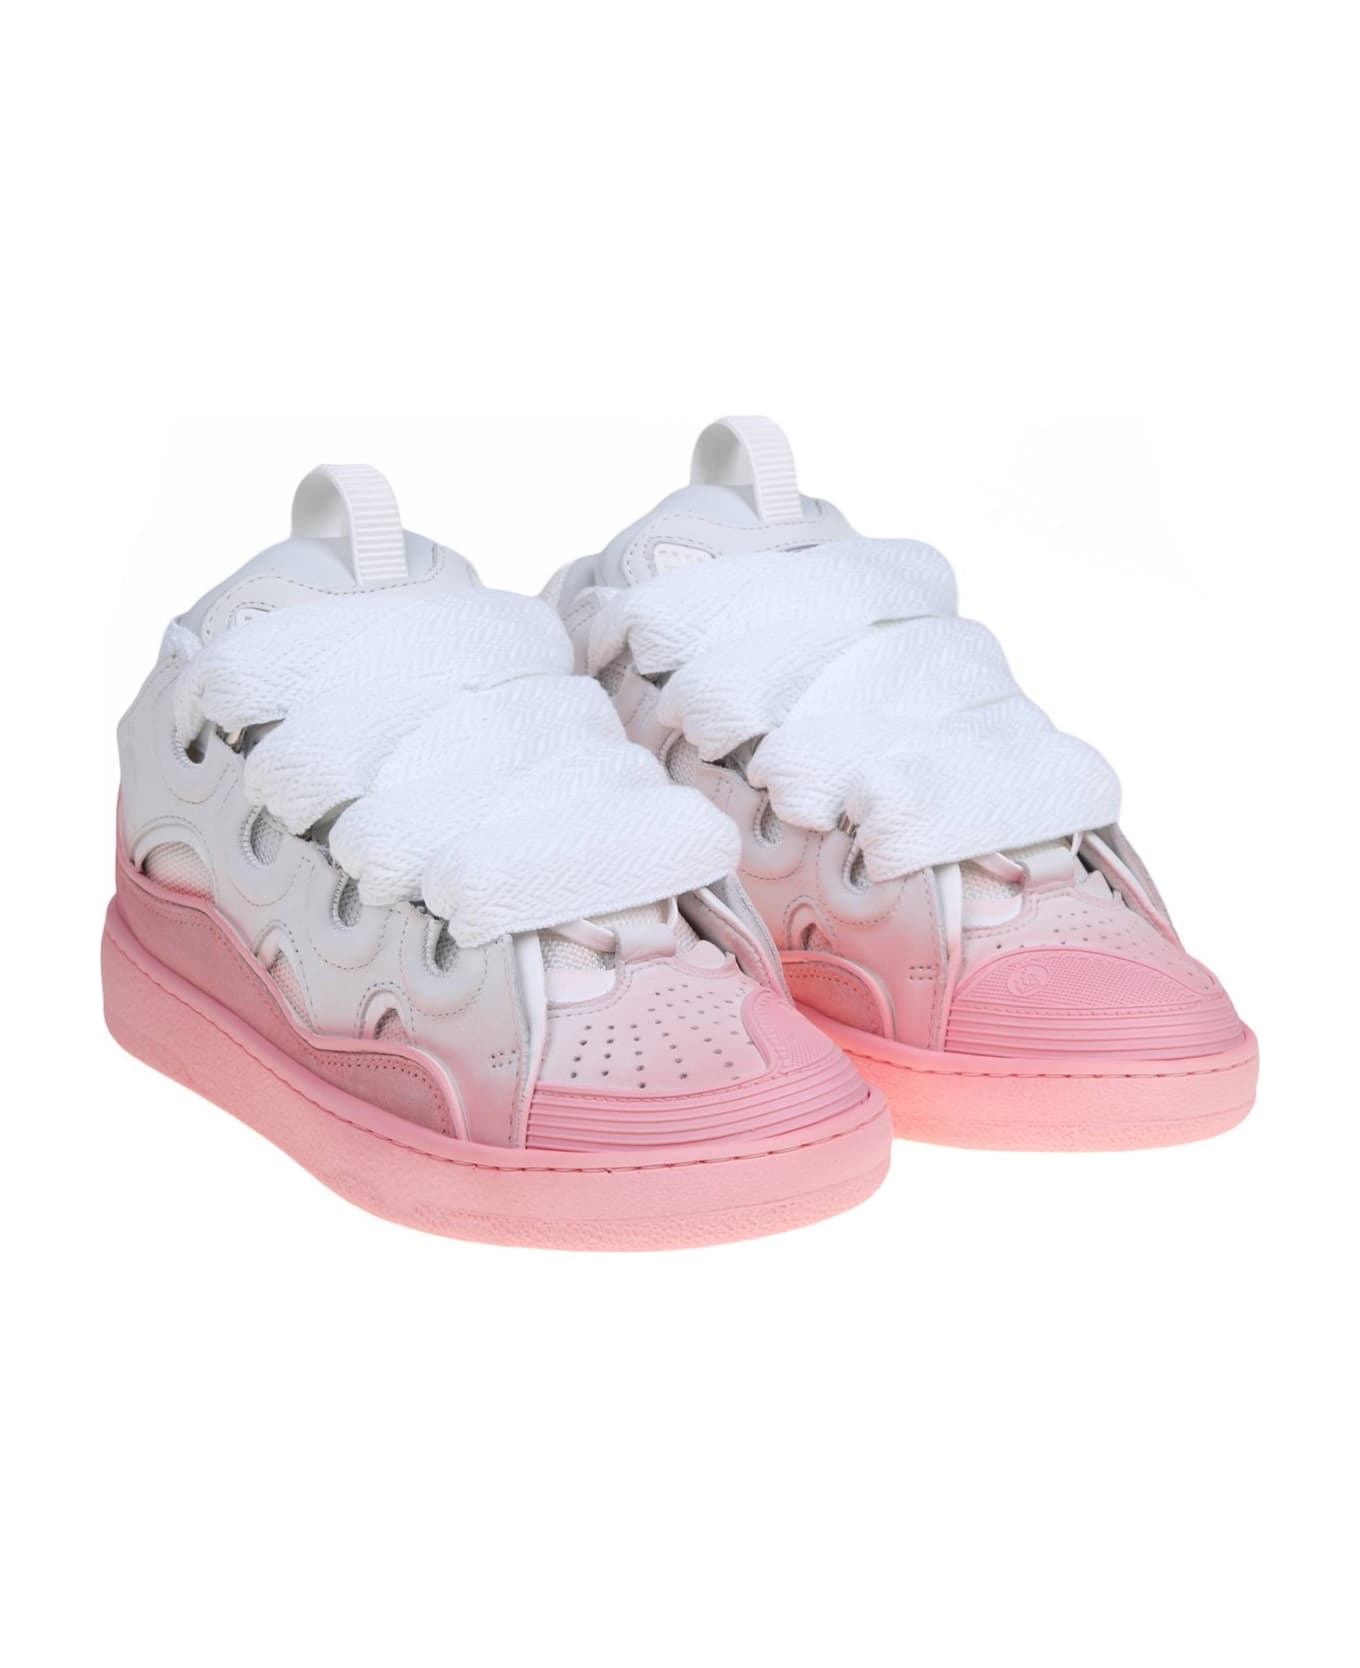 Lanvin Curb Sneakers In White And Pink Leather - Pink